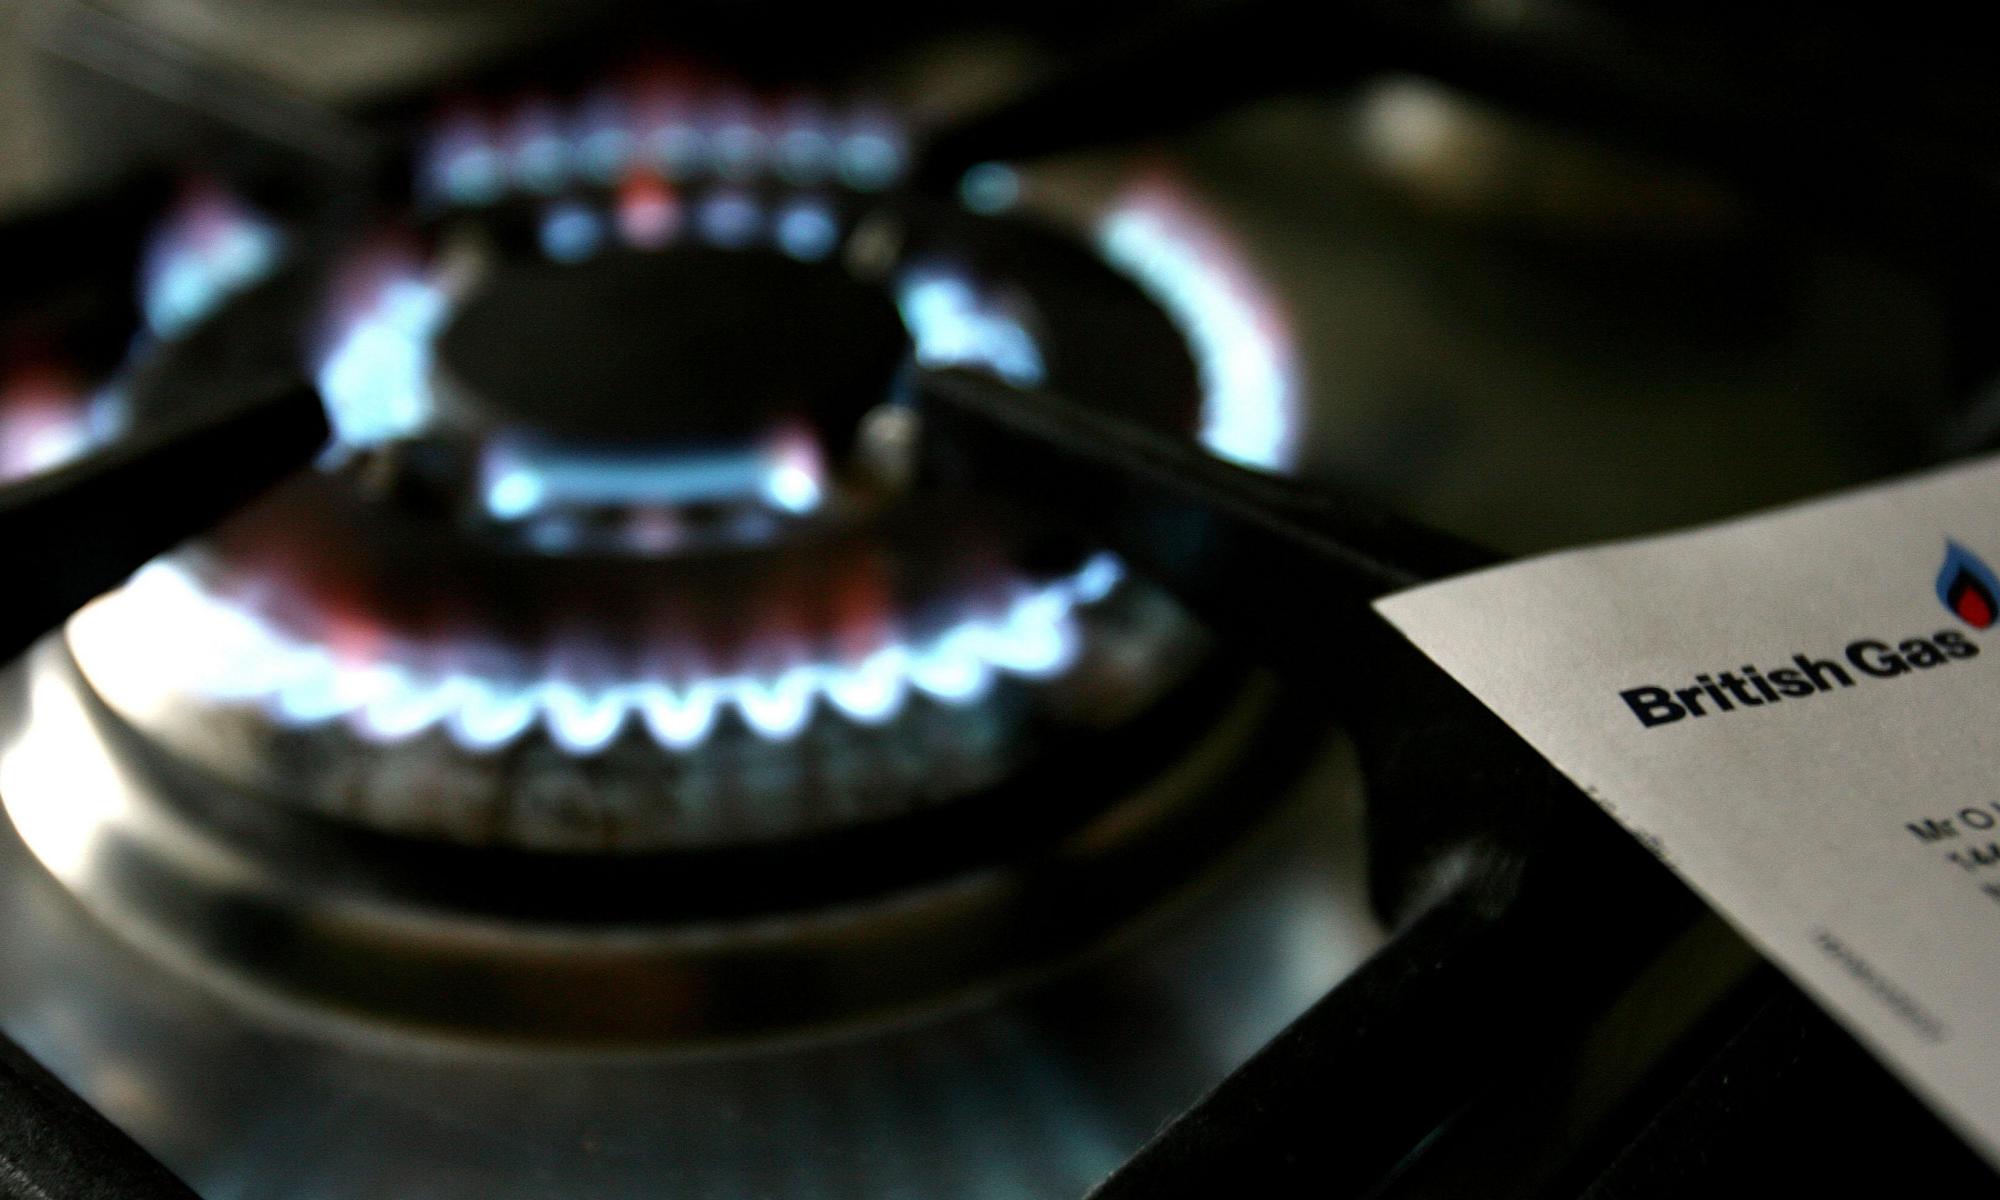 british gas launches fixed-rate energy deal offering 12% saving on price cap